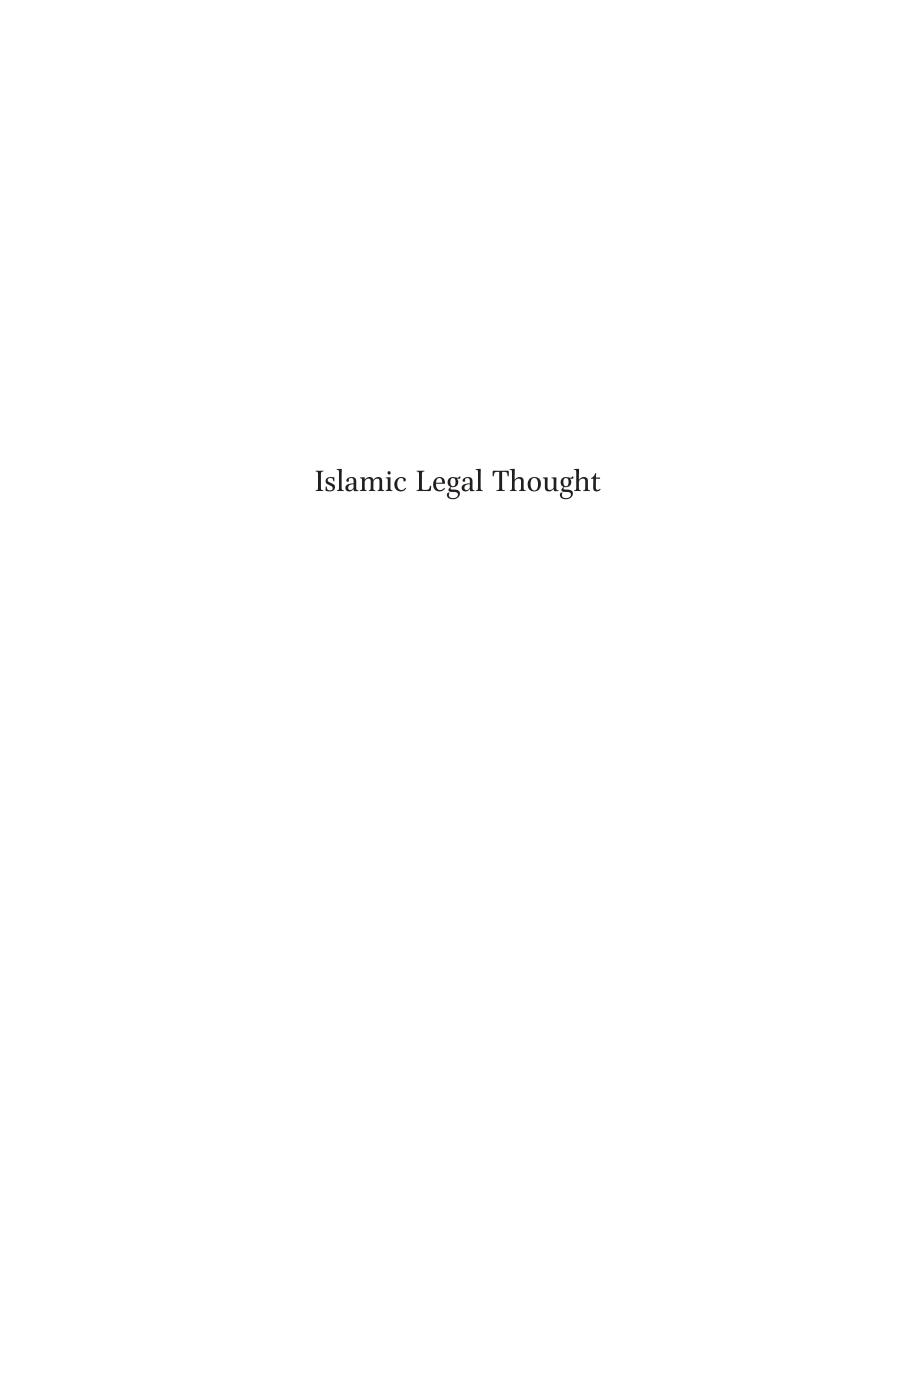 Islamic Legal Thought   A Compendium of Muslim Jurists, 2013